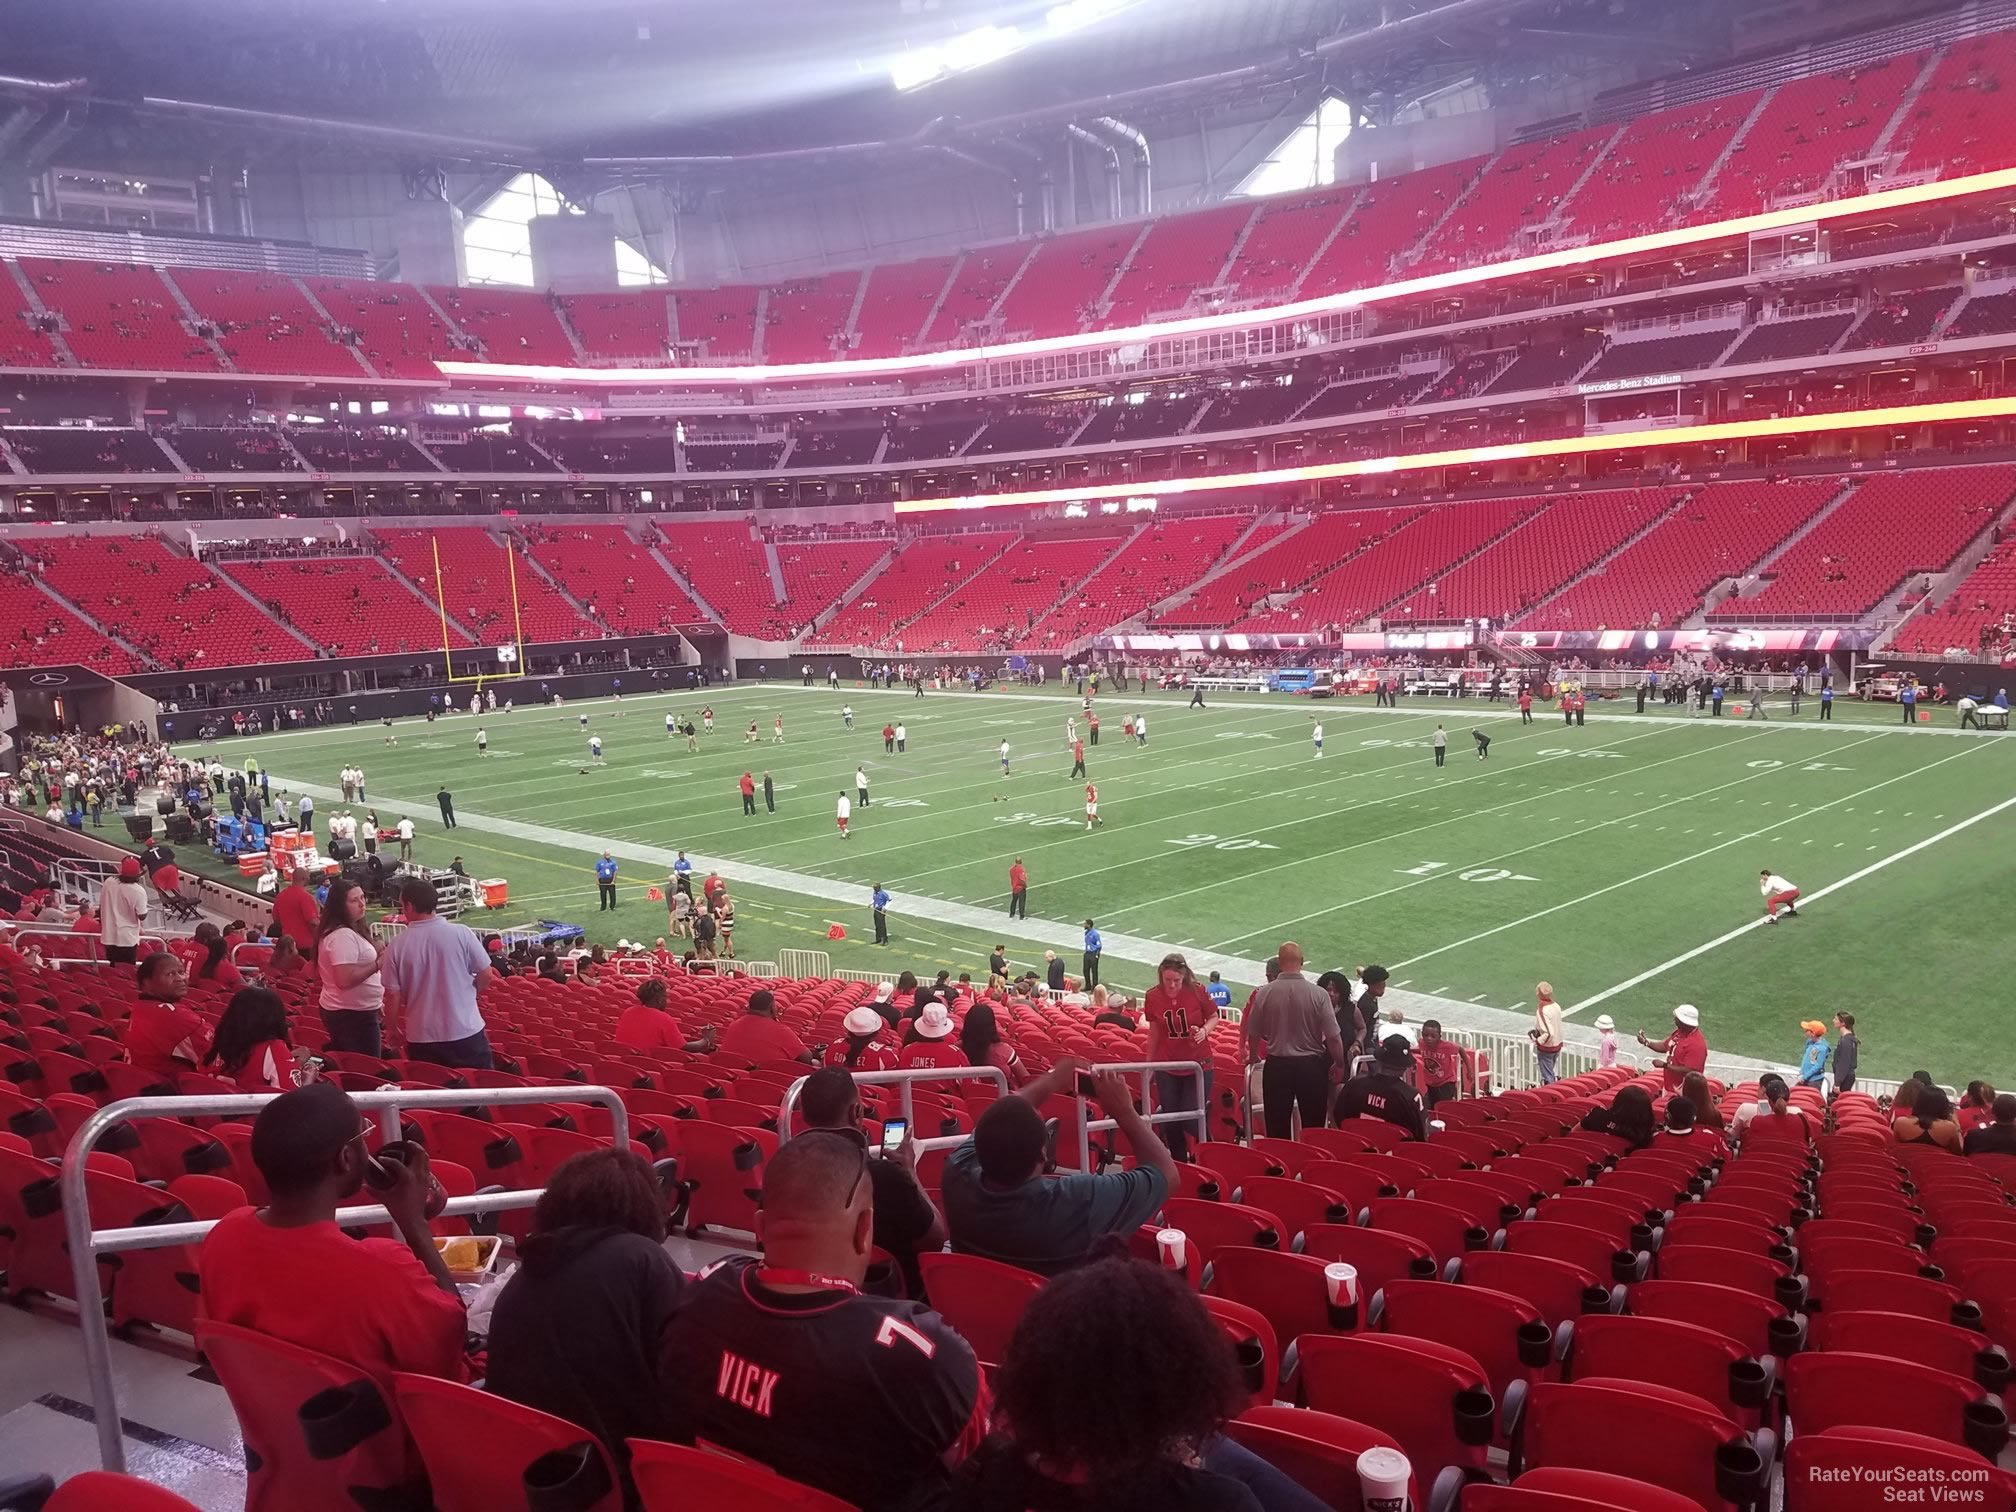 section 105, row 32 seat view  for football - mercedes-benz stadium